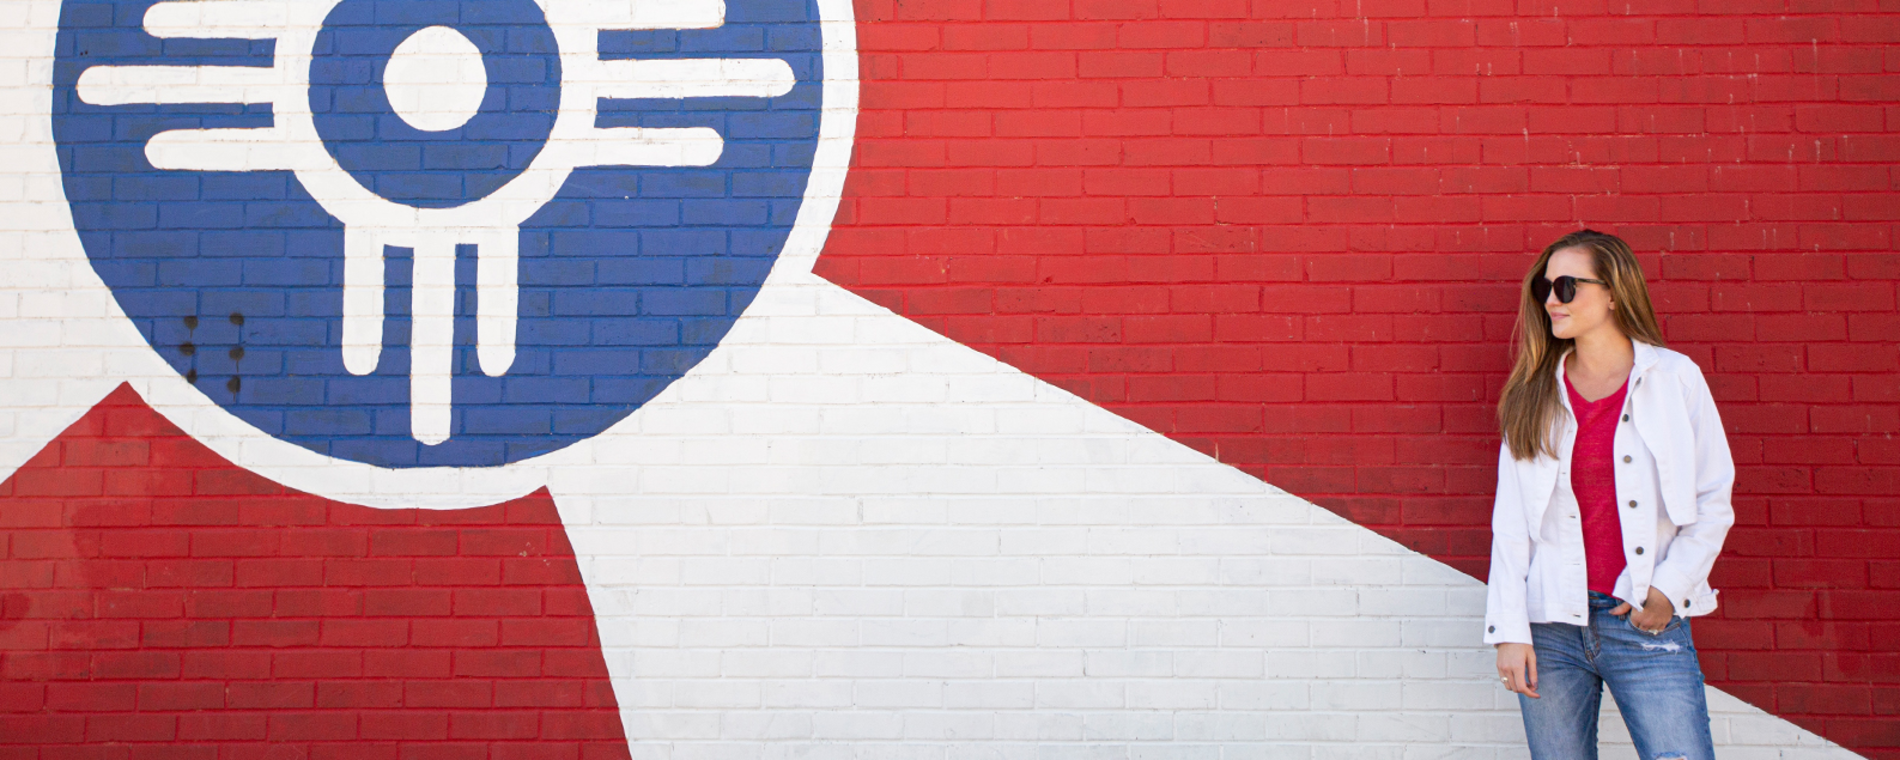 A woman stands in front of a Wichita Flag mural painted on the side of a building